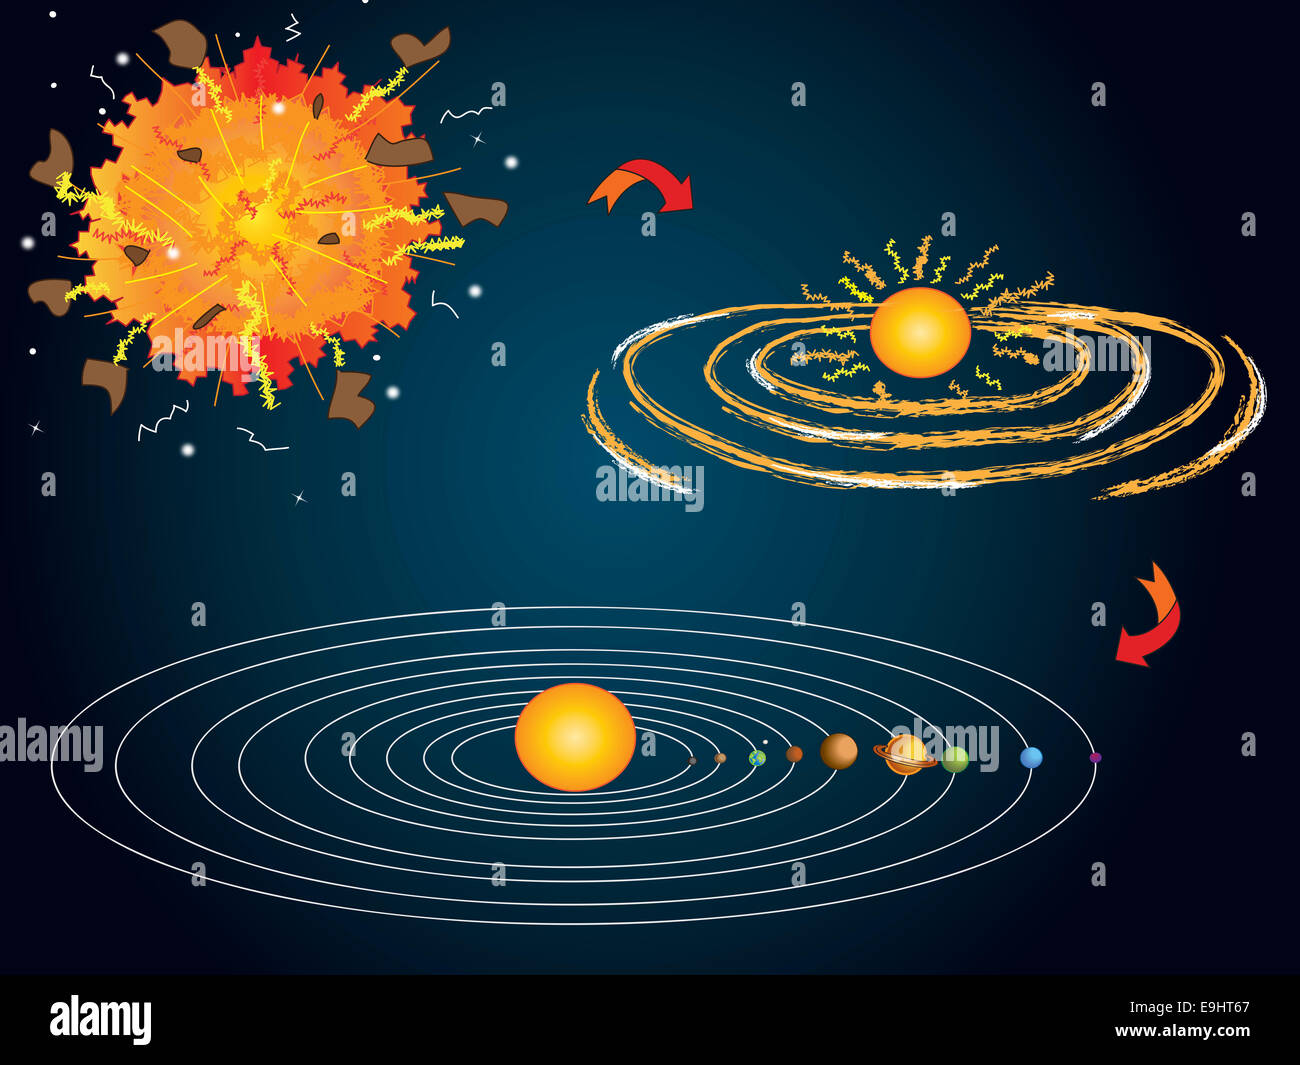 illustration of Big Bang and the formation of the solar system Stock Photo